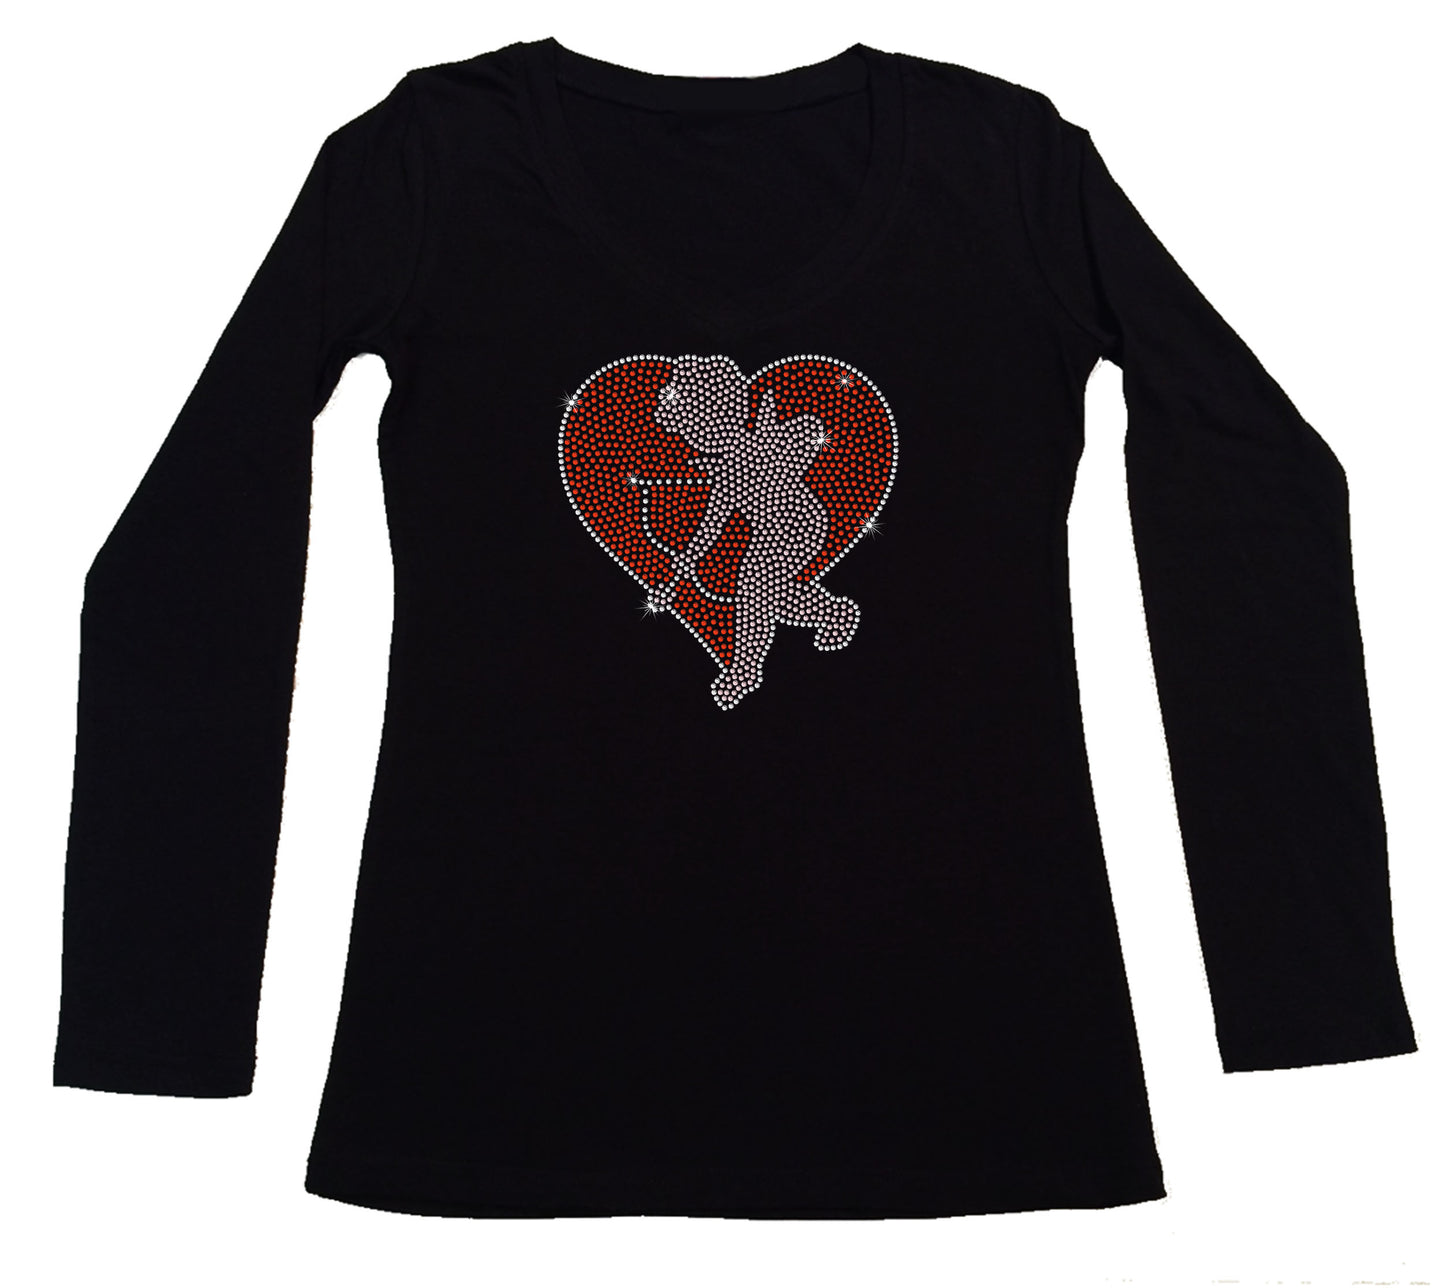 Women's Rhinestone Fitted Tight Snug Shirt Red Heart with Cupid and His Bow and Arrow - Valentines Shirt